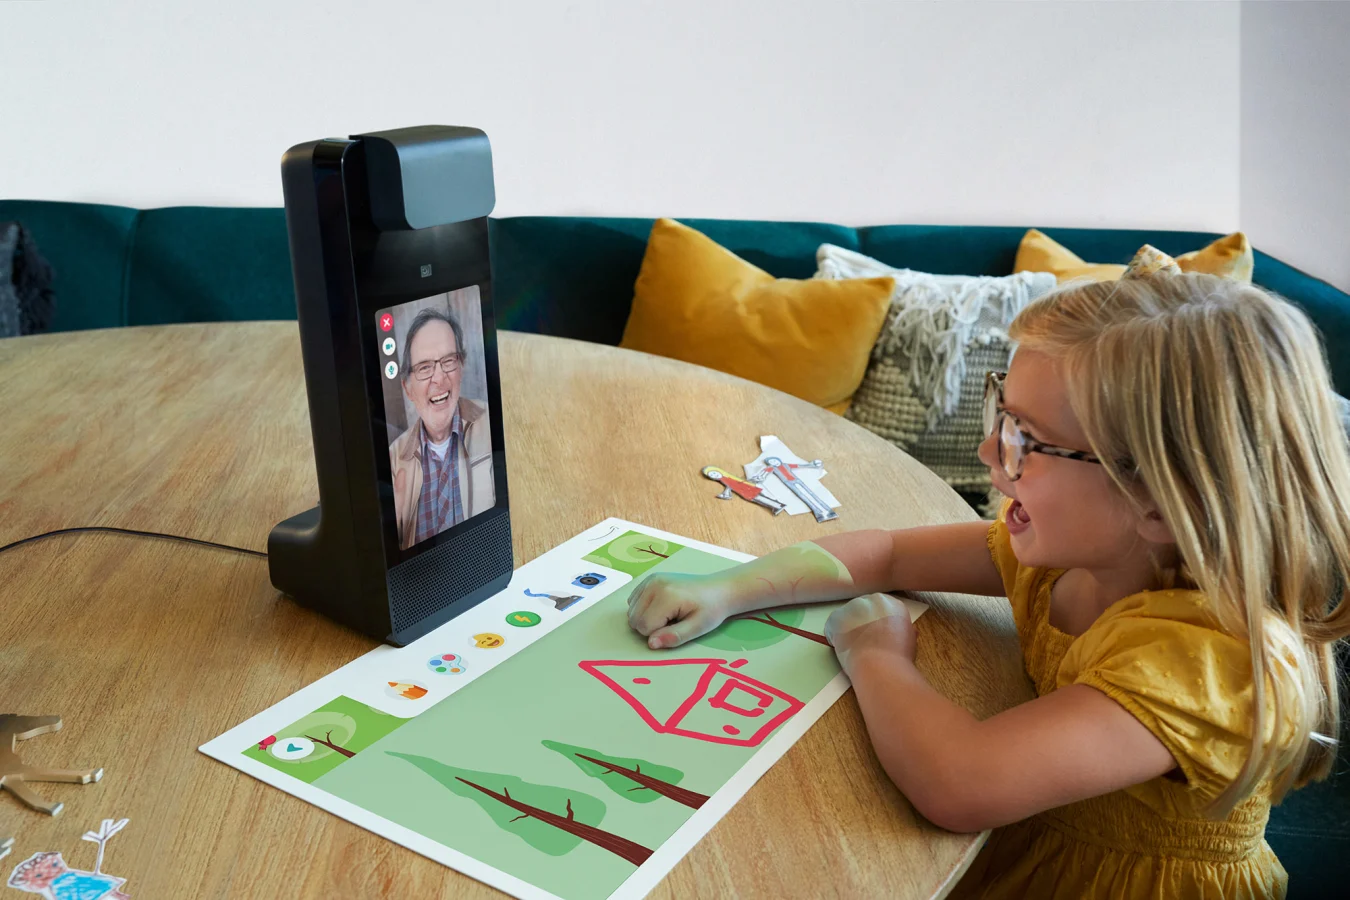 Amazon's kid-centric Glow interactive video call device goes on sale across the US